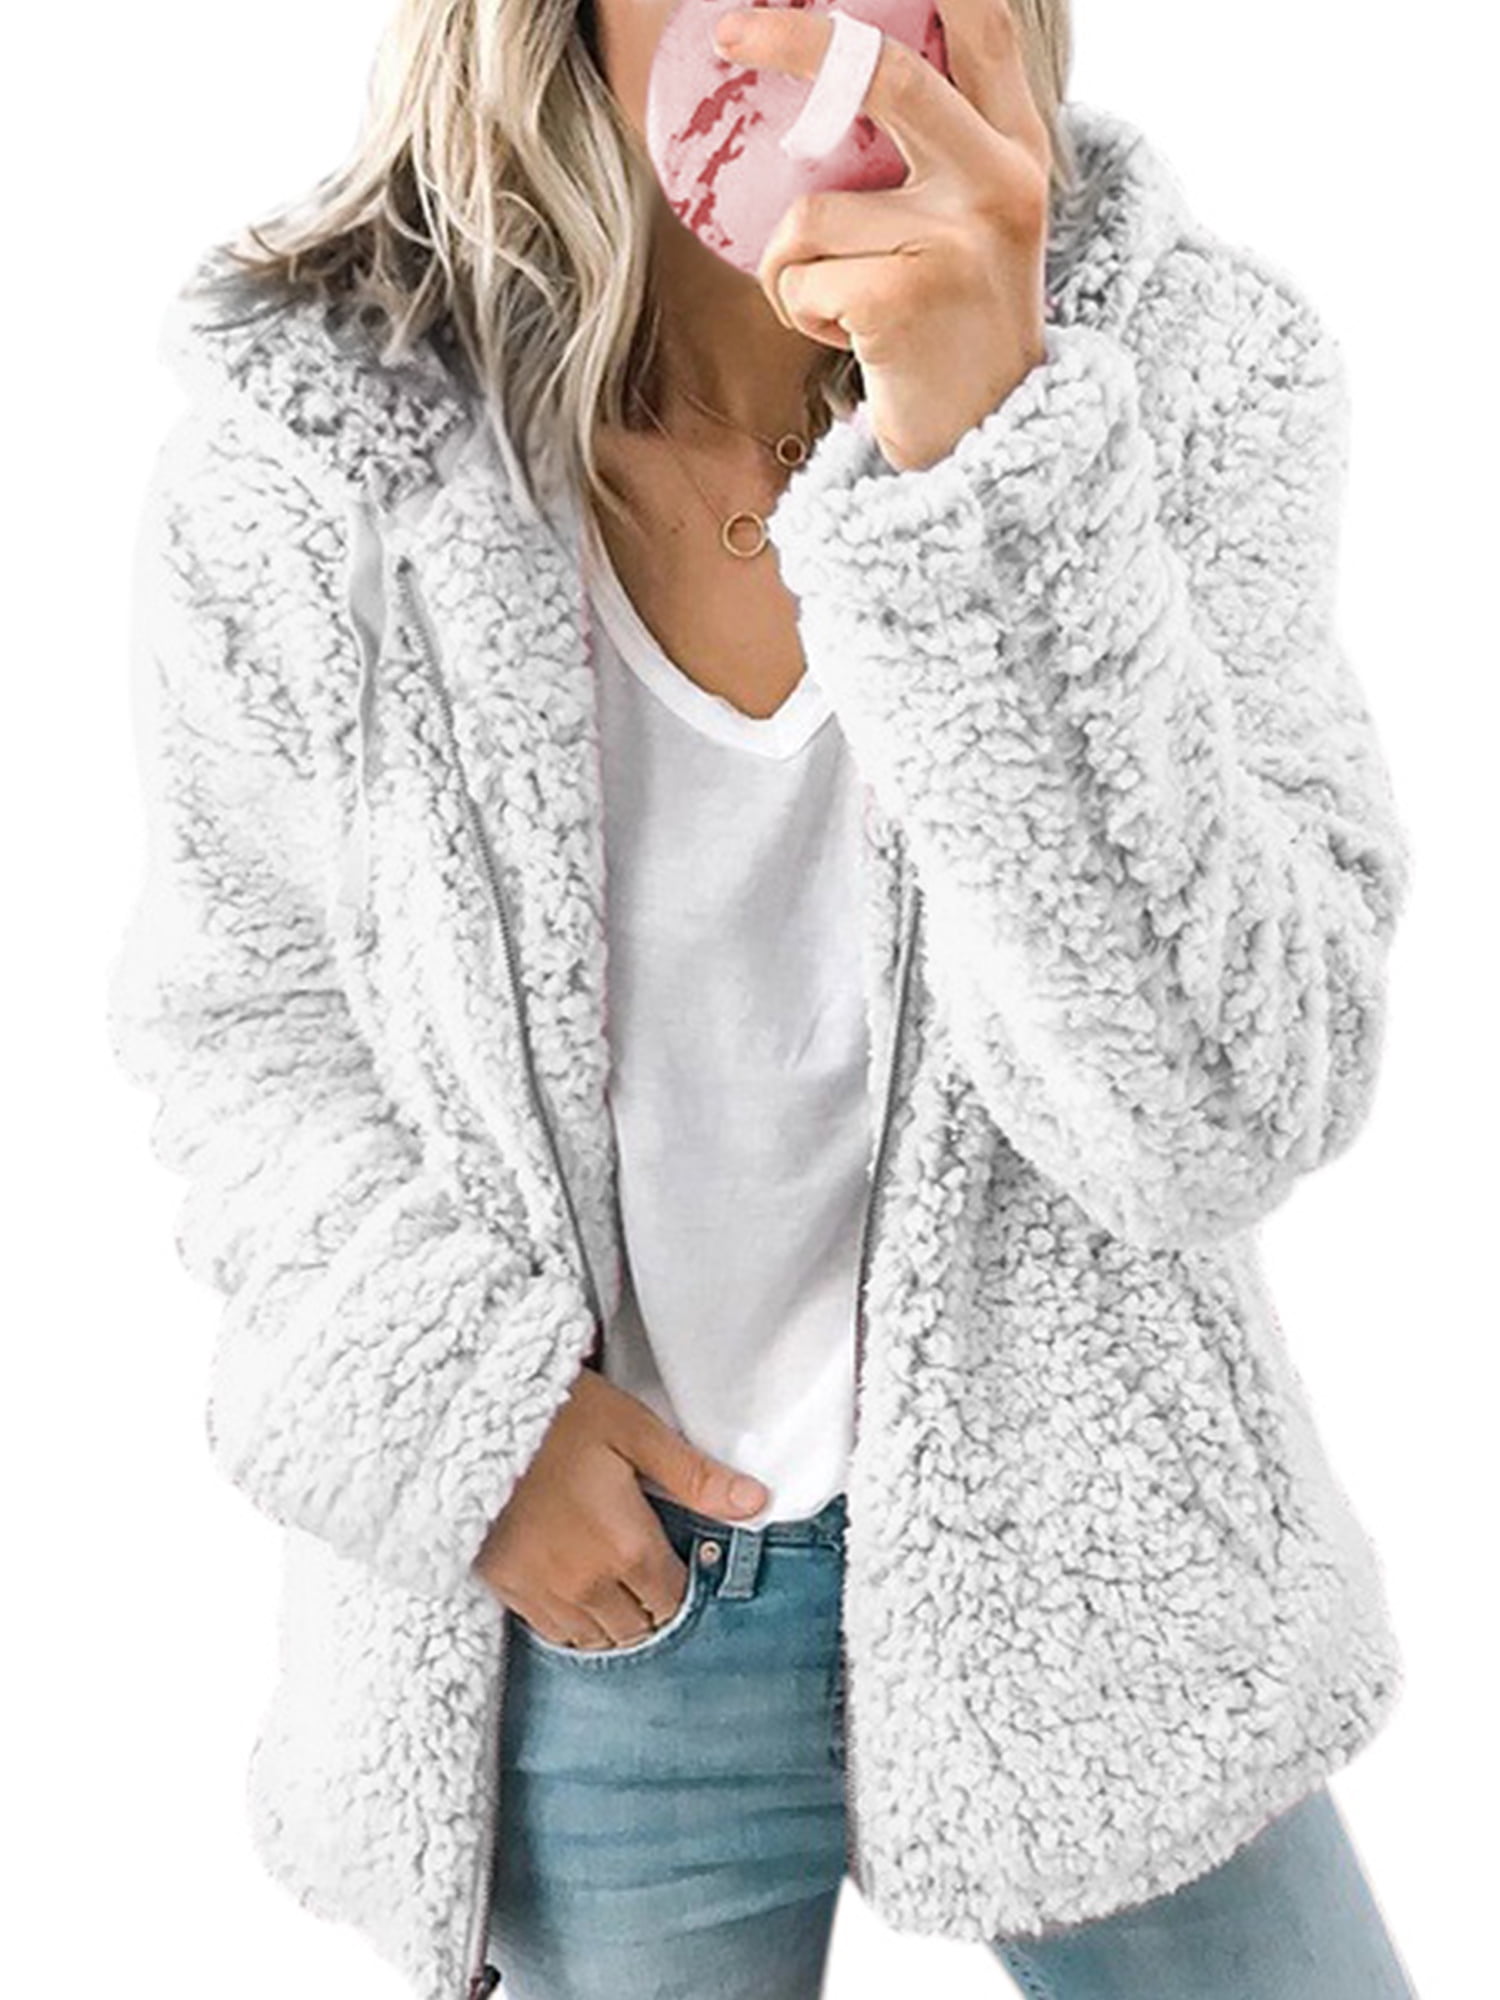 HOMEBABY Women Winter Warm Cotton Parka Long Thick Fur Collar Jacket Ladies Hooded Outwear Quilted Padded Coat Lightweight Long Sleeve Tops